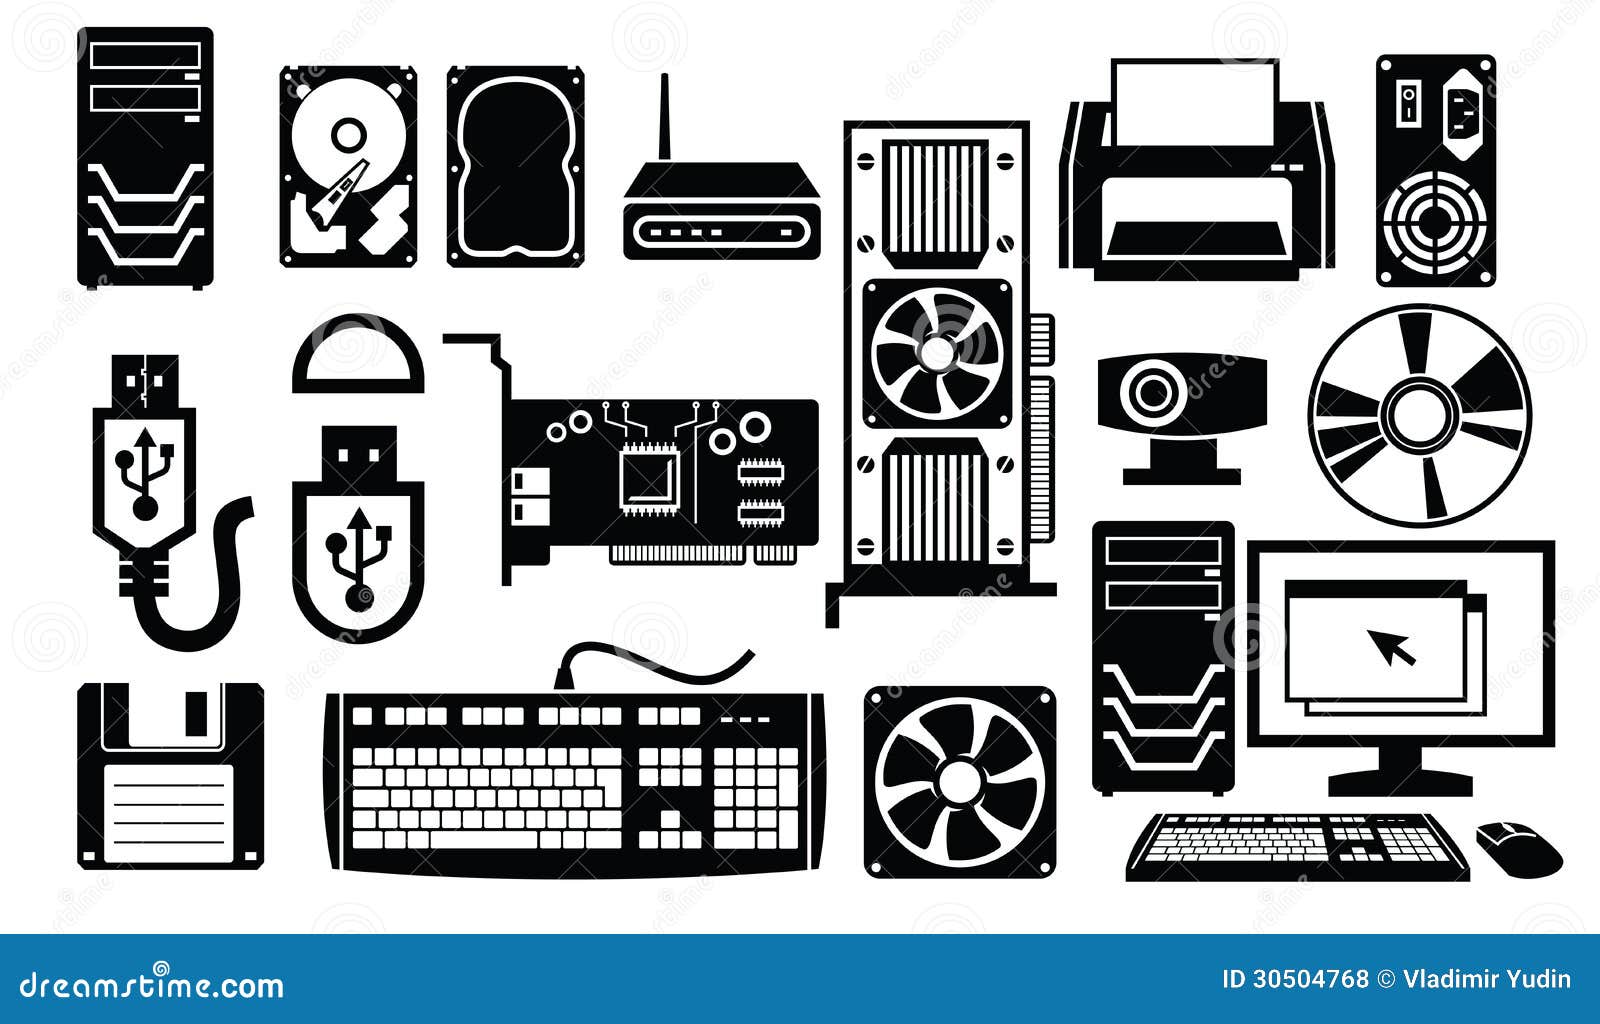 computer hardware clipart free - photo #22